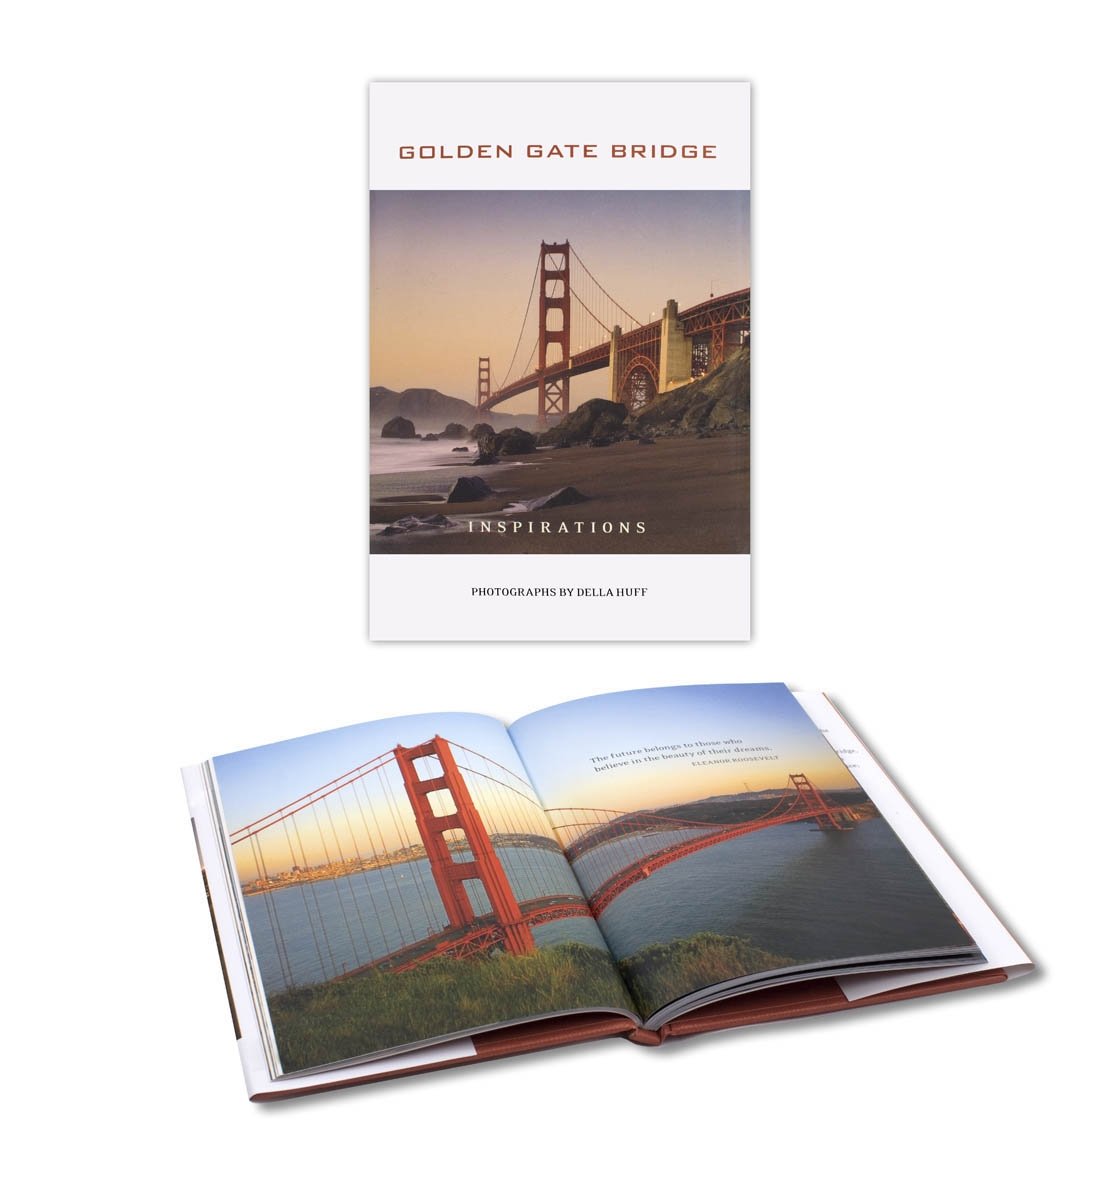 Golden Gate Bridge Inspirations book, published by the Golden Gate National Parks Conservancy.